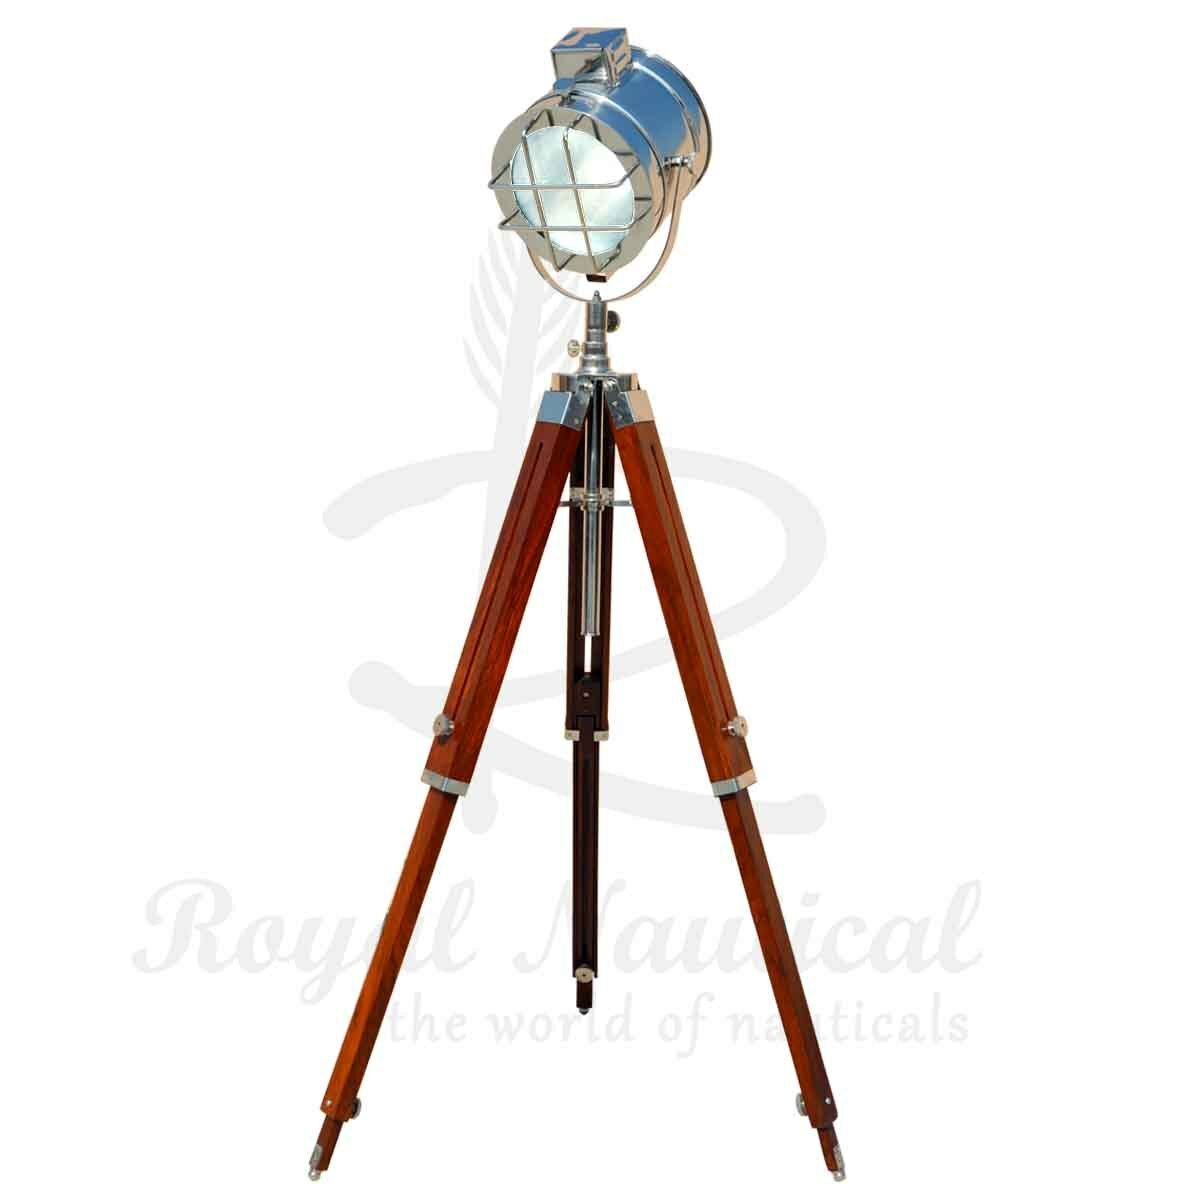 Details About Tripod Floor Lamp Nautical Spotlight Vintage Studio Wooden Light Home Office New intended for sizing 1200 X 1200